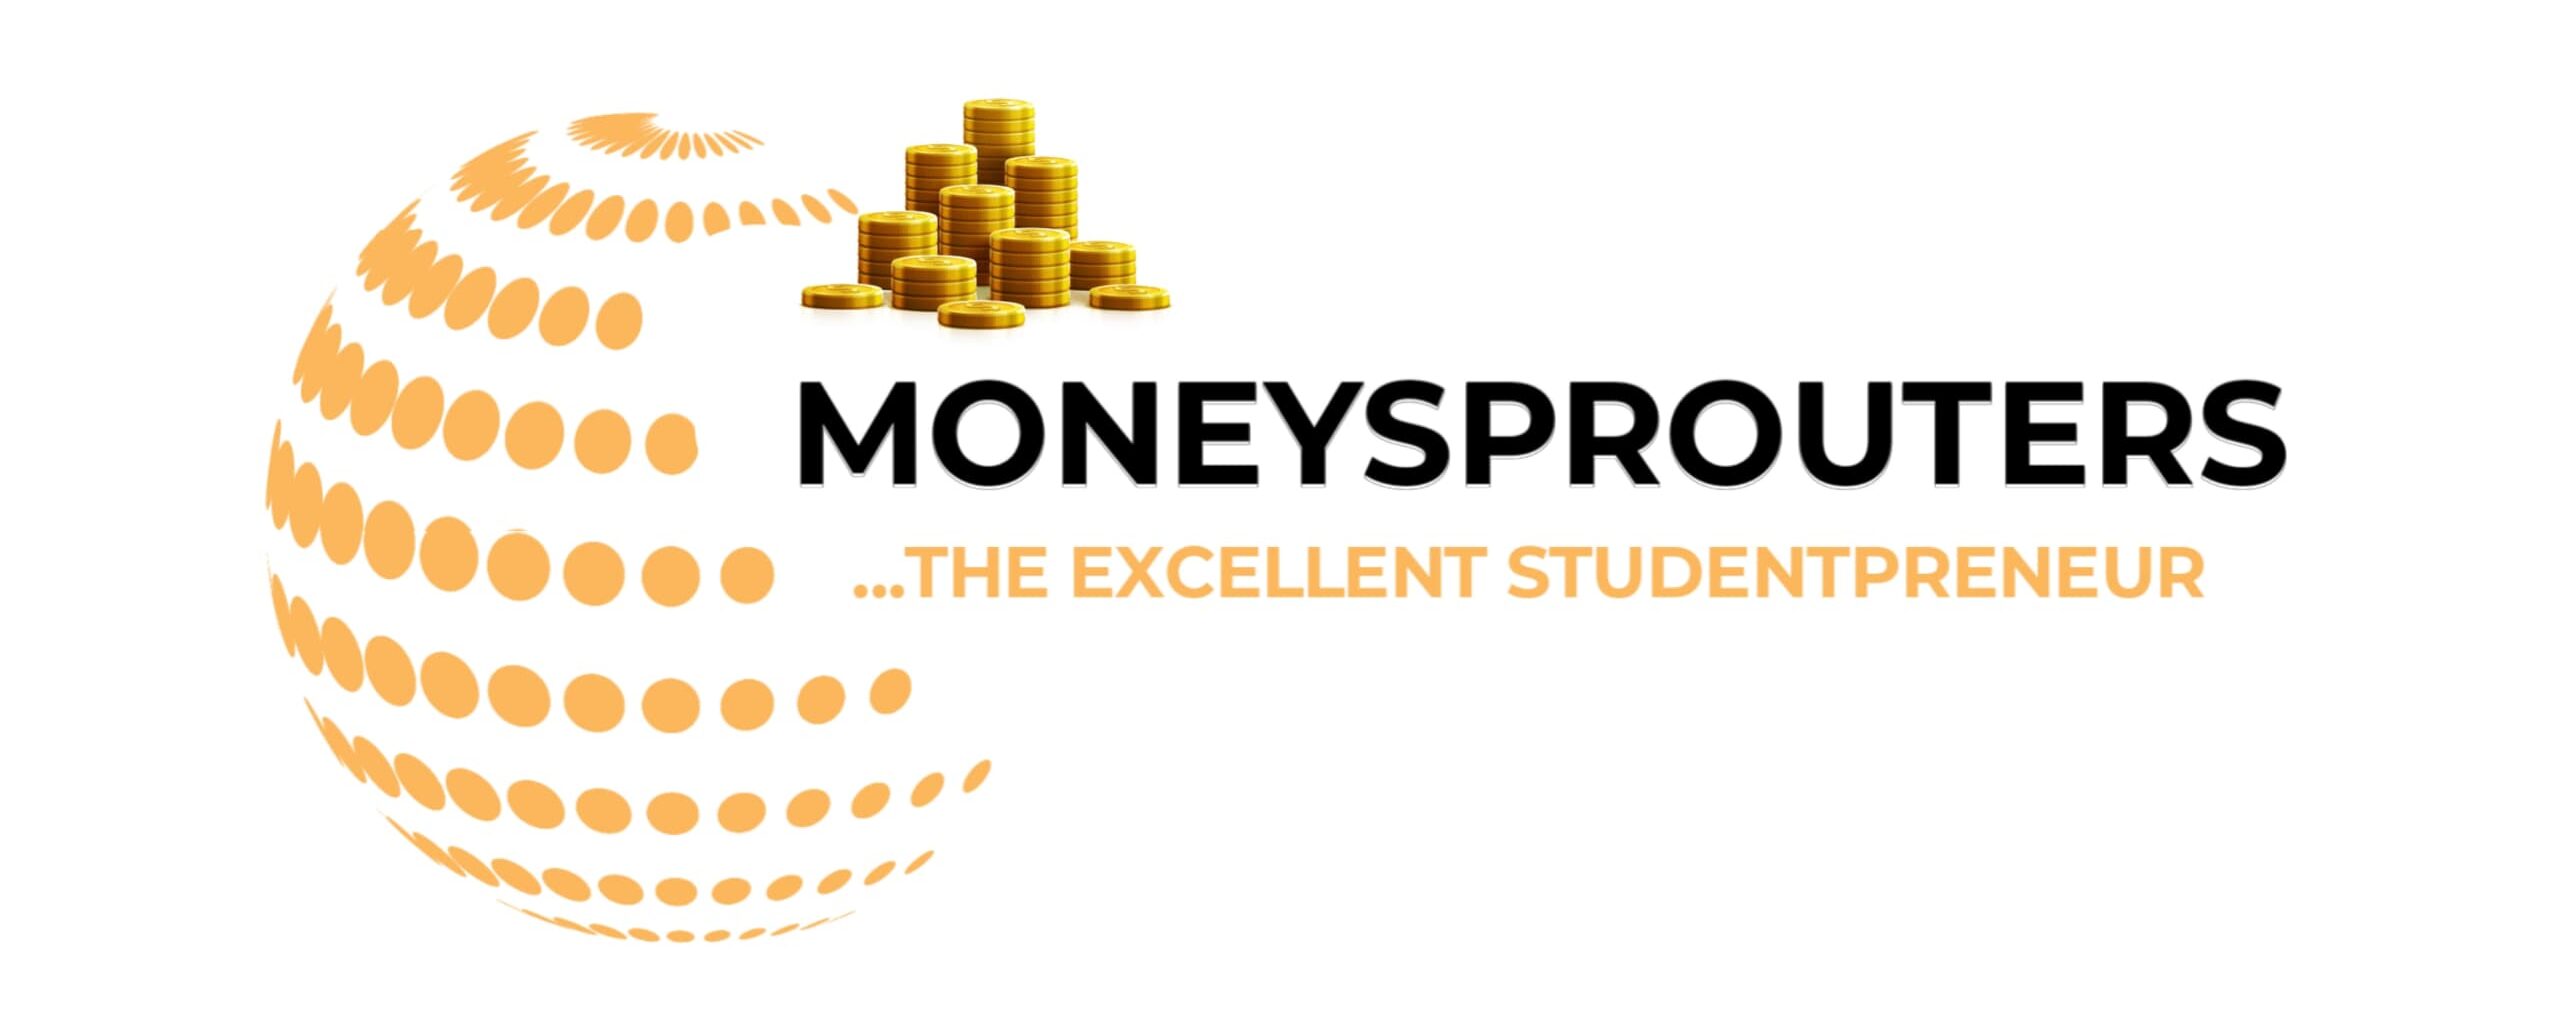 Moneysprouters